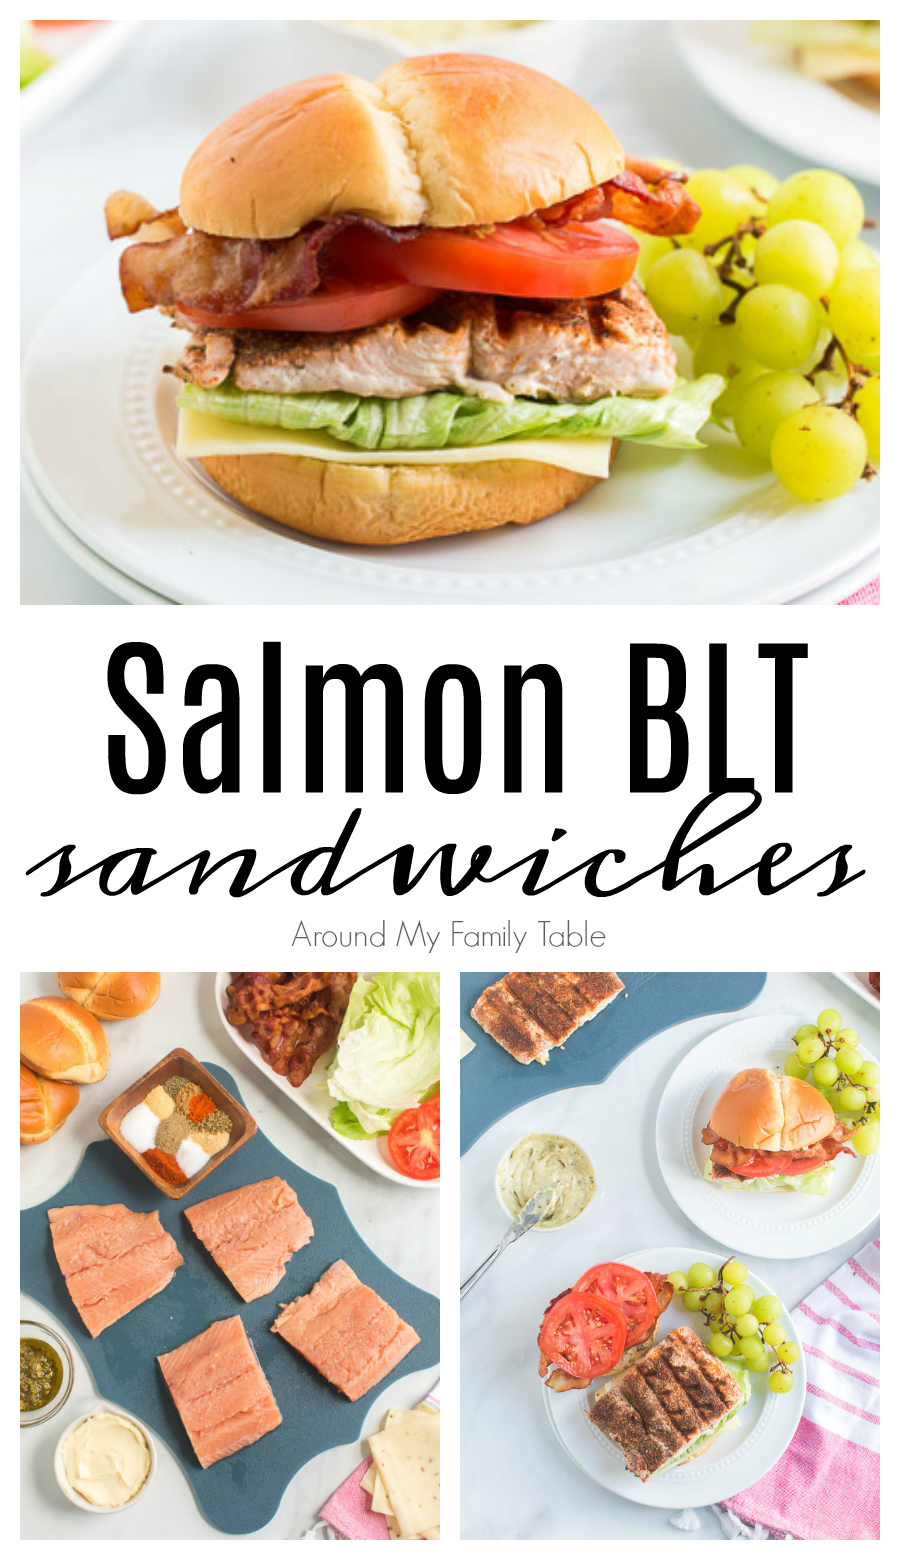 Grilled blackened salmon is delicious on its own but take it up a notch! Make this BLT sandwich recipe for a flavorful healthy lunch or dinner! via @slingmama